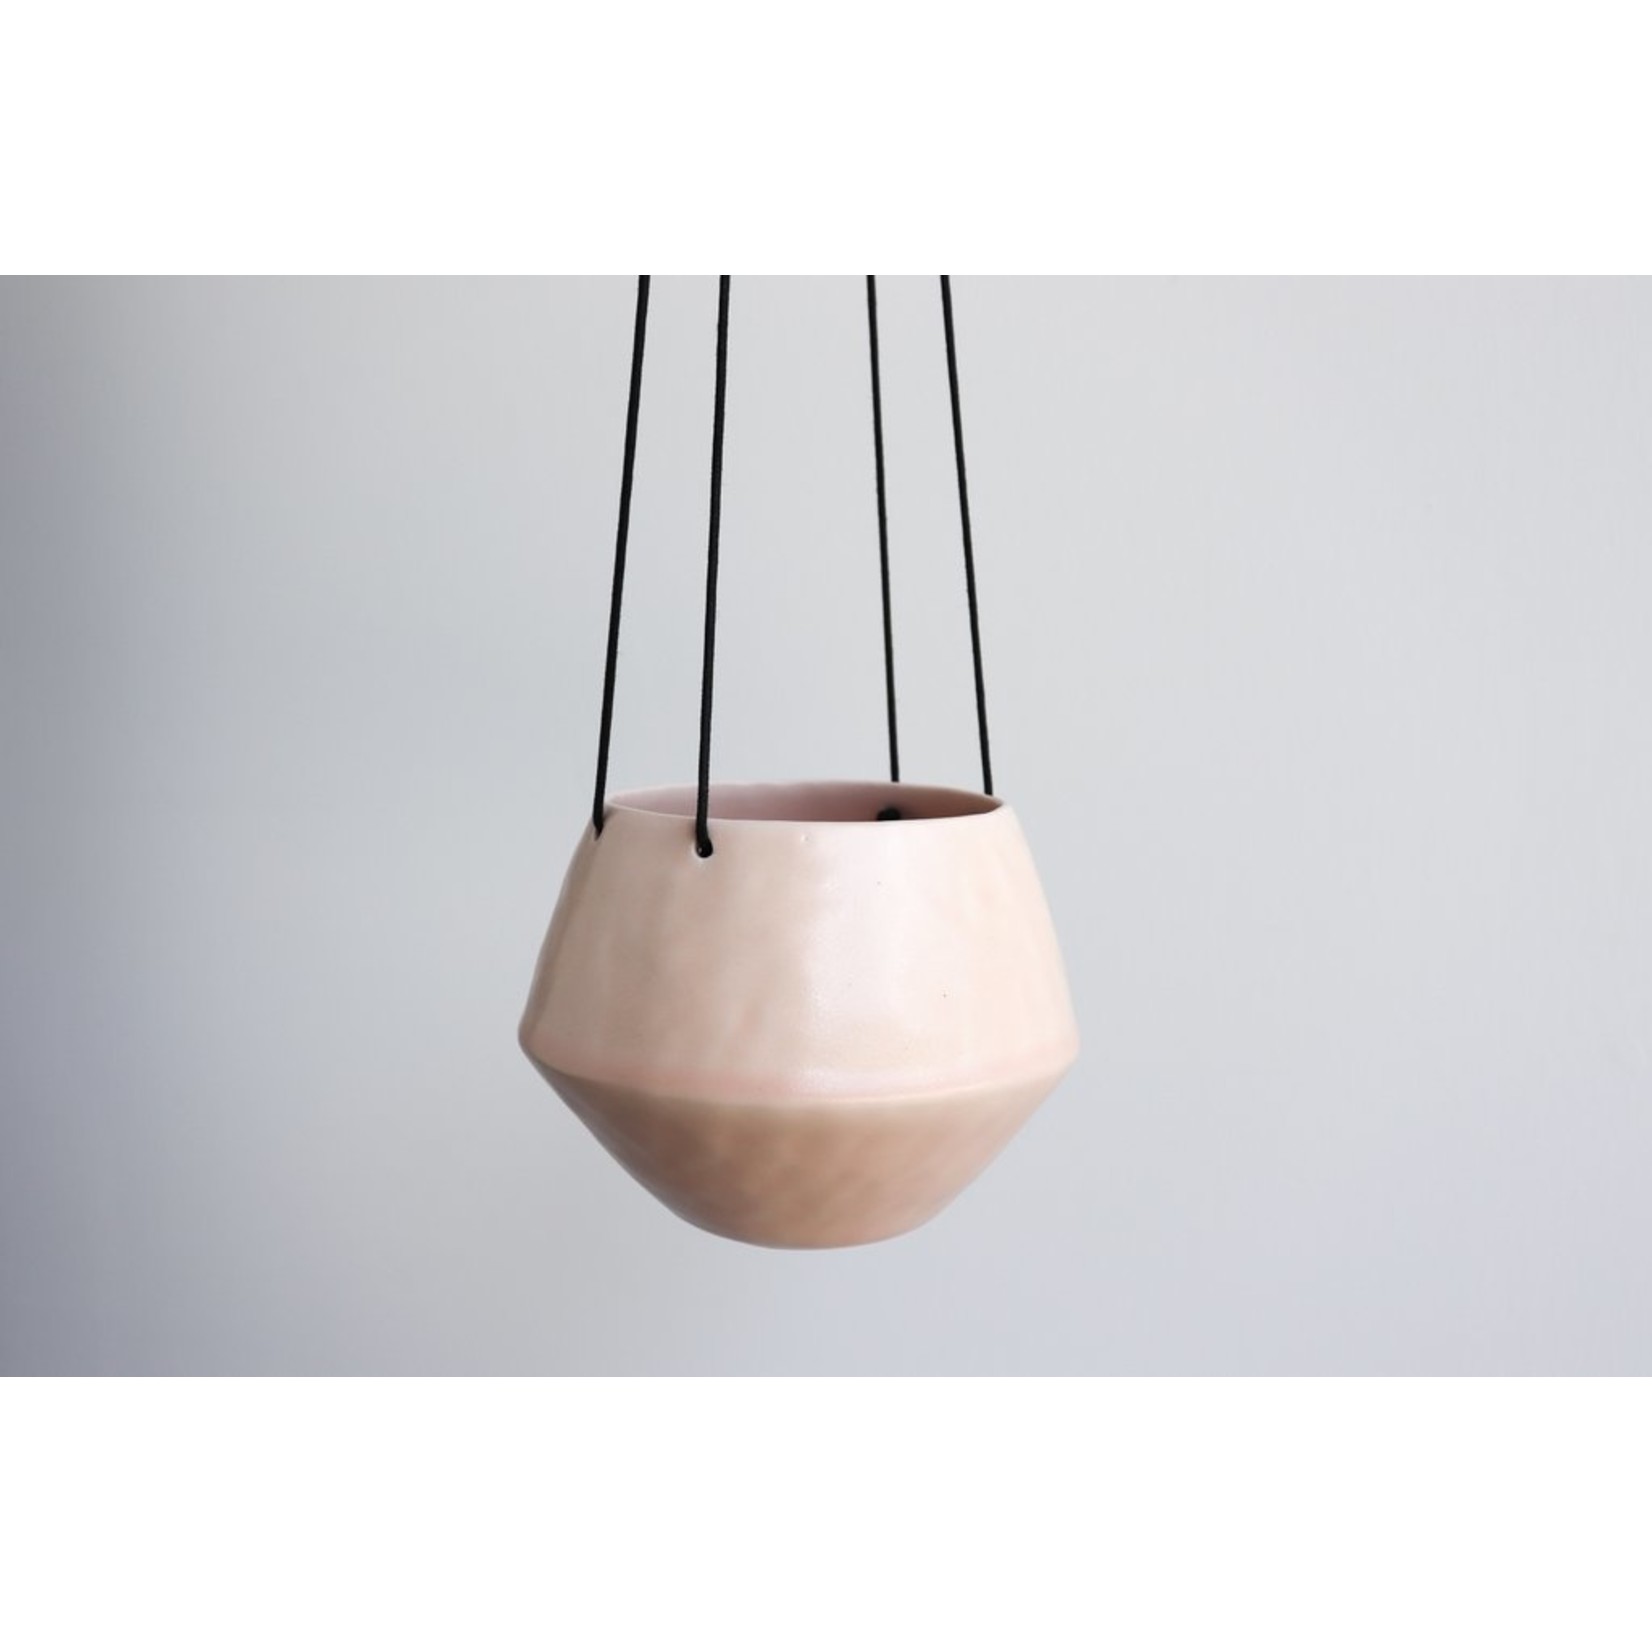 Benotti Round Pinched Hanging Planter - Small:Summer Sweet